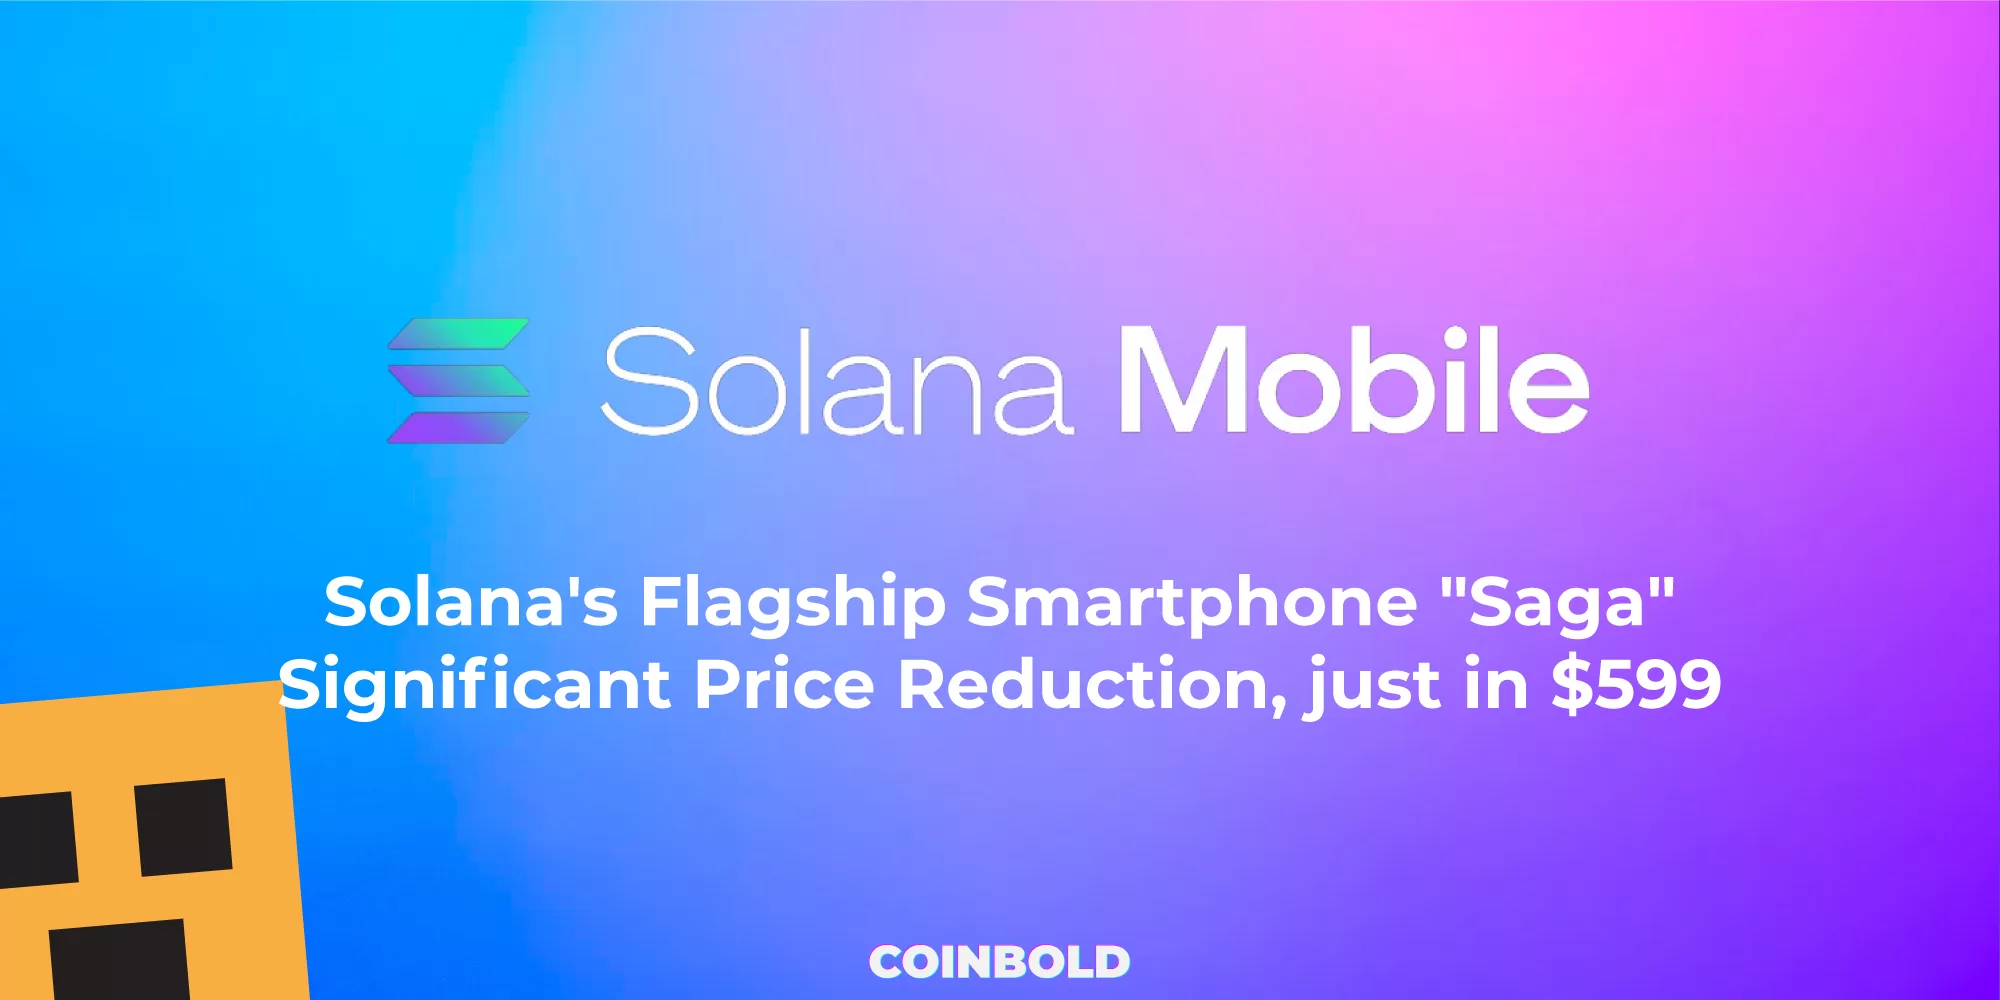 Solana's Flagship Smartphone Saga Significant Price Reduction, just in $599